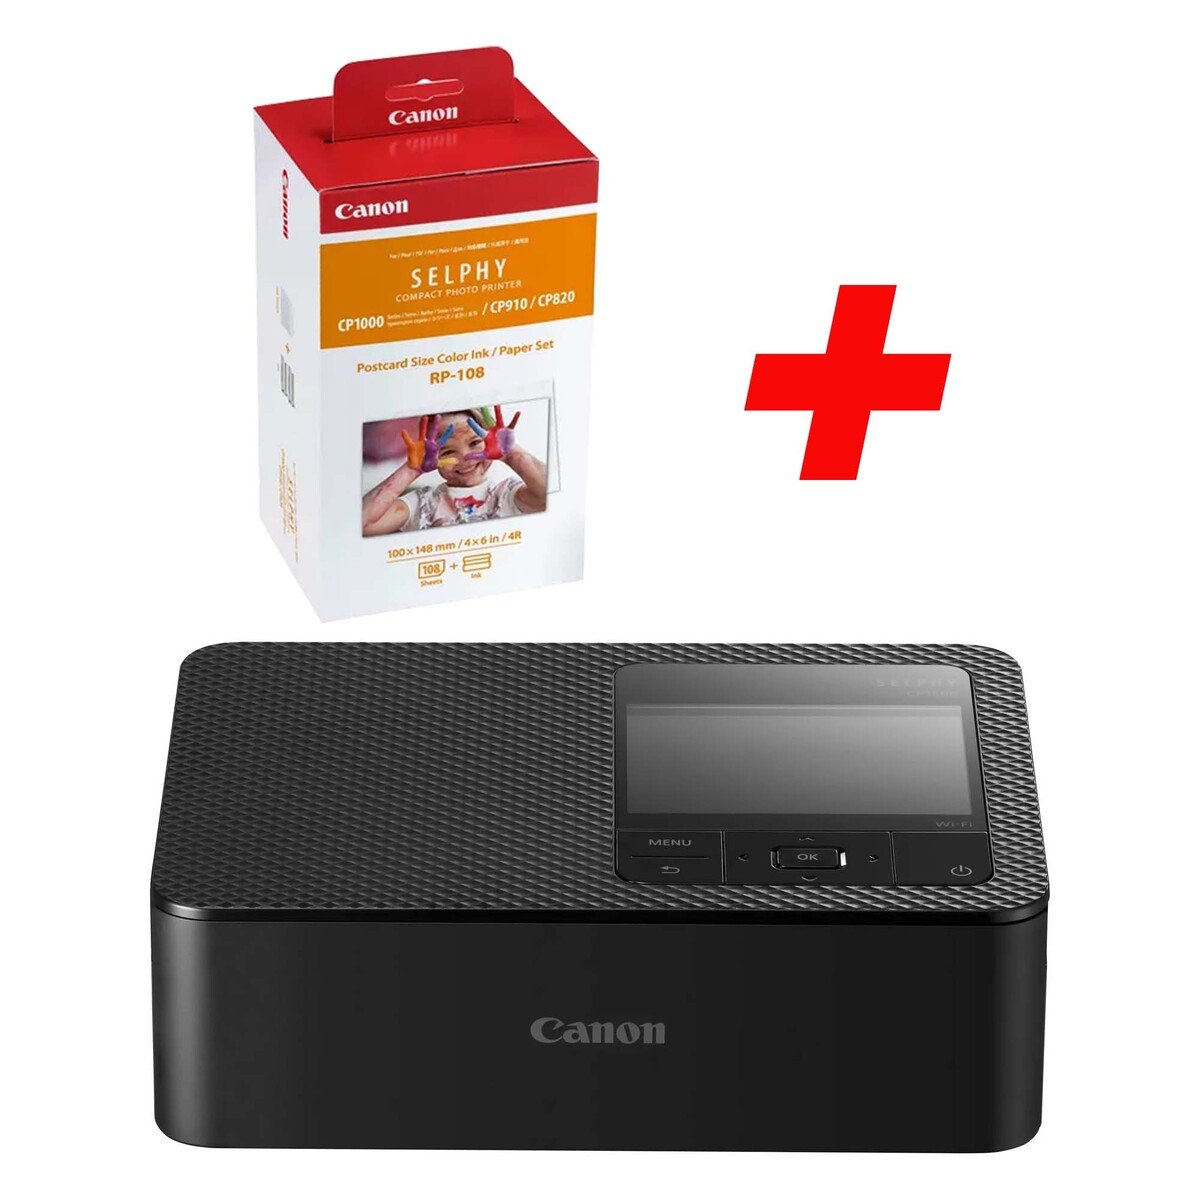 Canon SELPHY CP1500 Colour Portable Photo Printer - Black + Canon RP-108  Colour Ink + 100 x 148 mm Paper Set, 108 Sheets Online at Best Price, Photo Printer